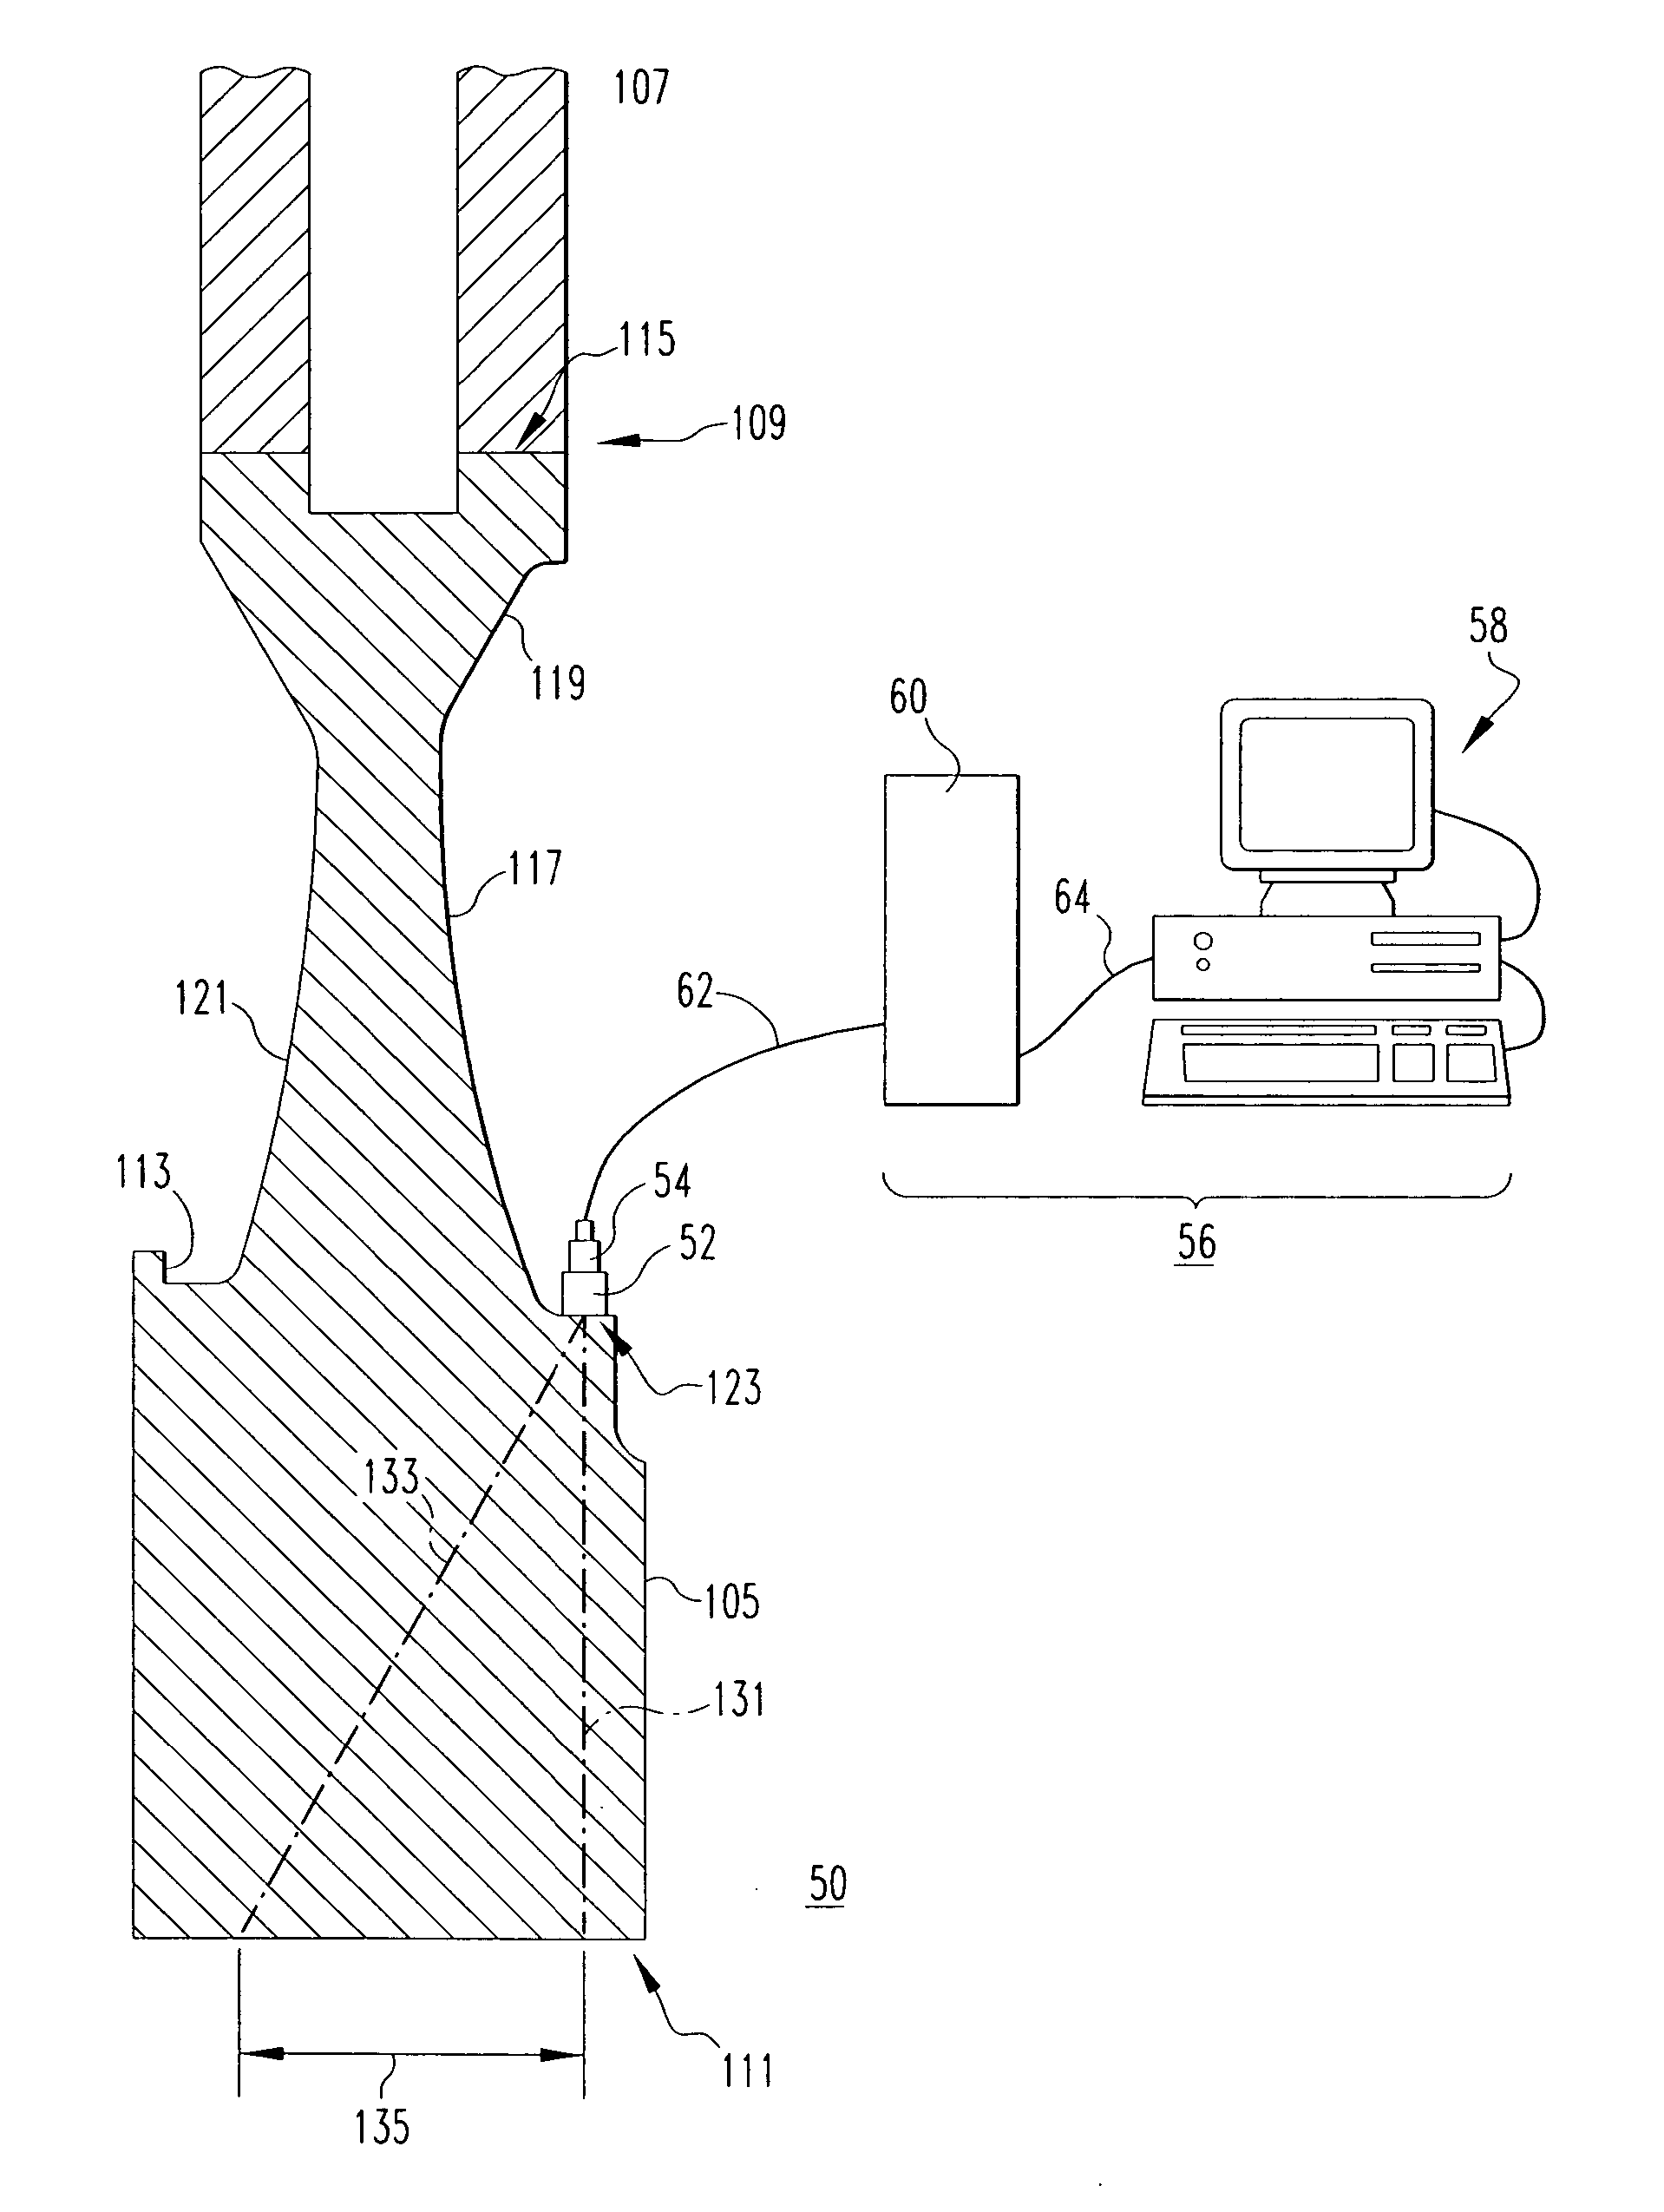 Phased array ultrasonic testing system and methods of examination and modeling employing the same